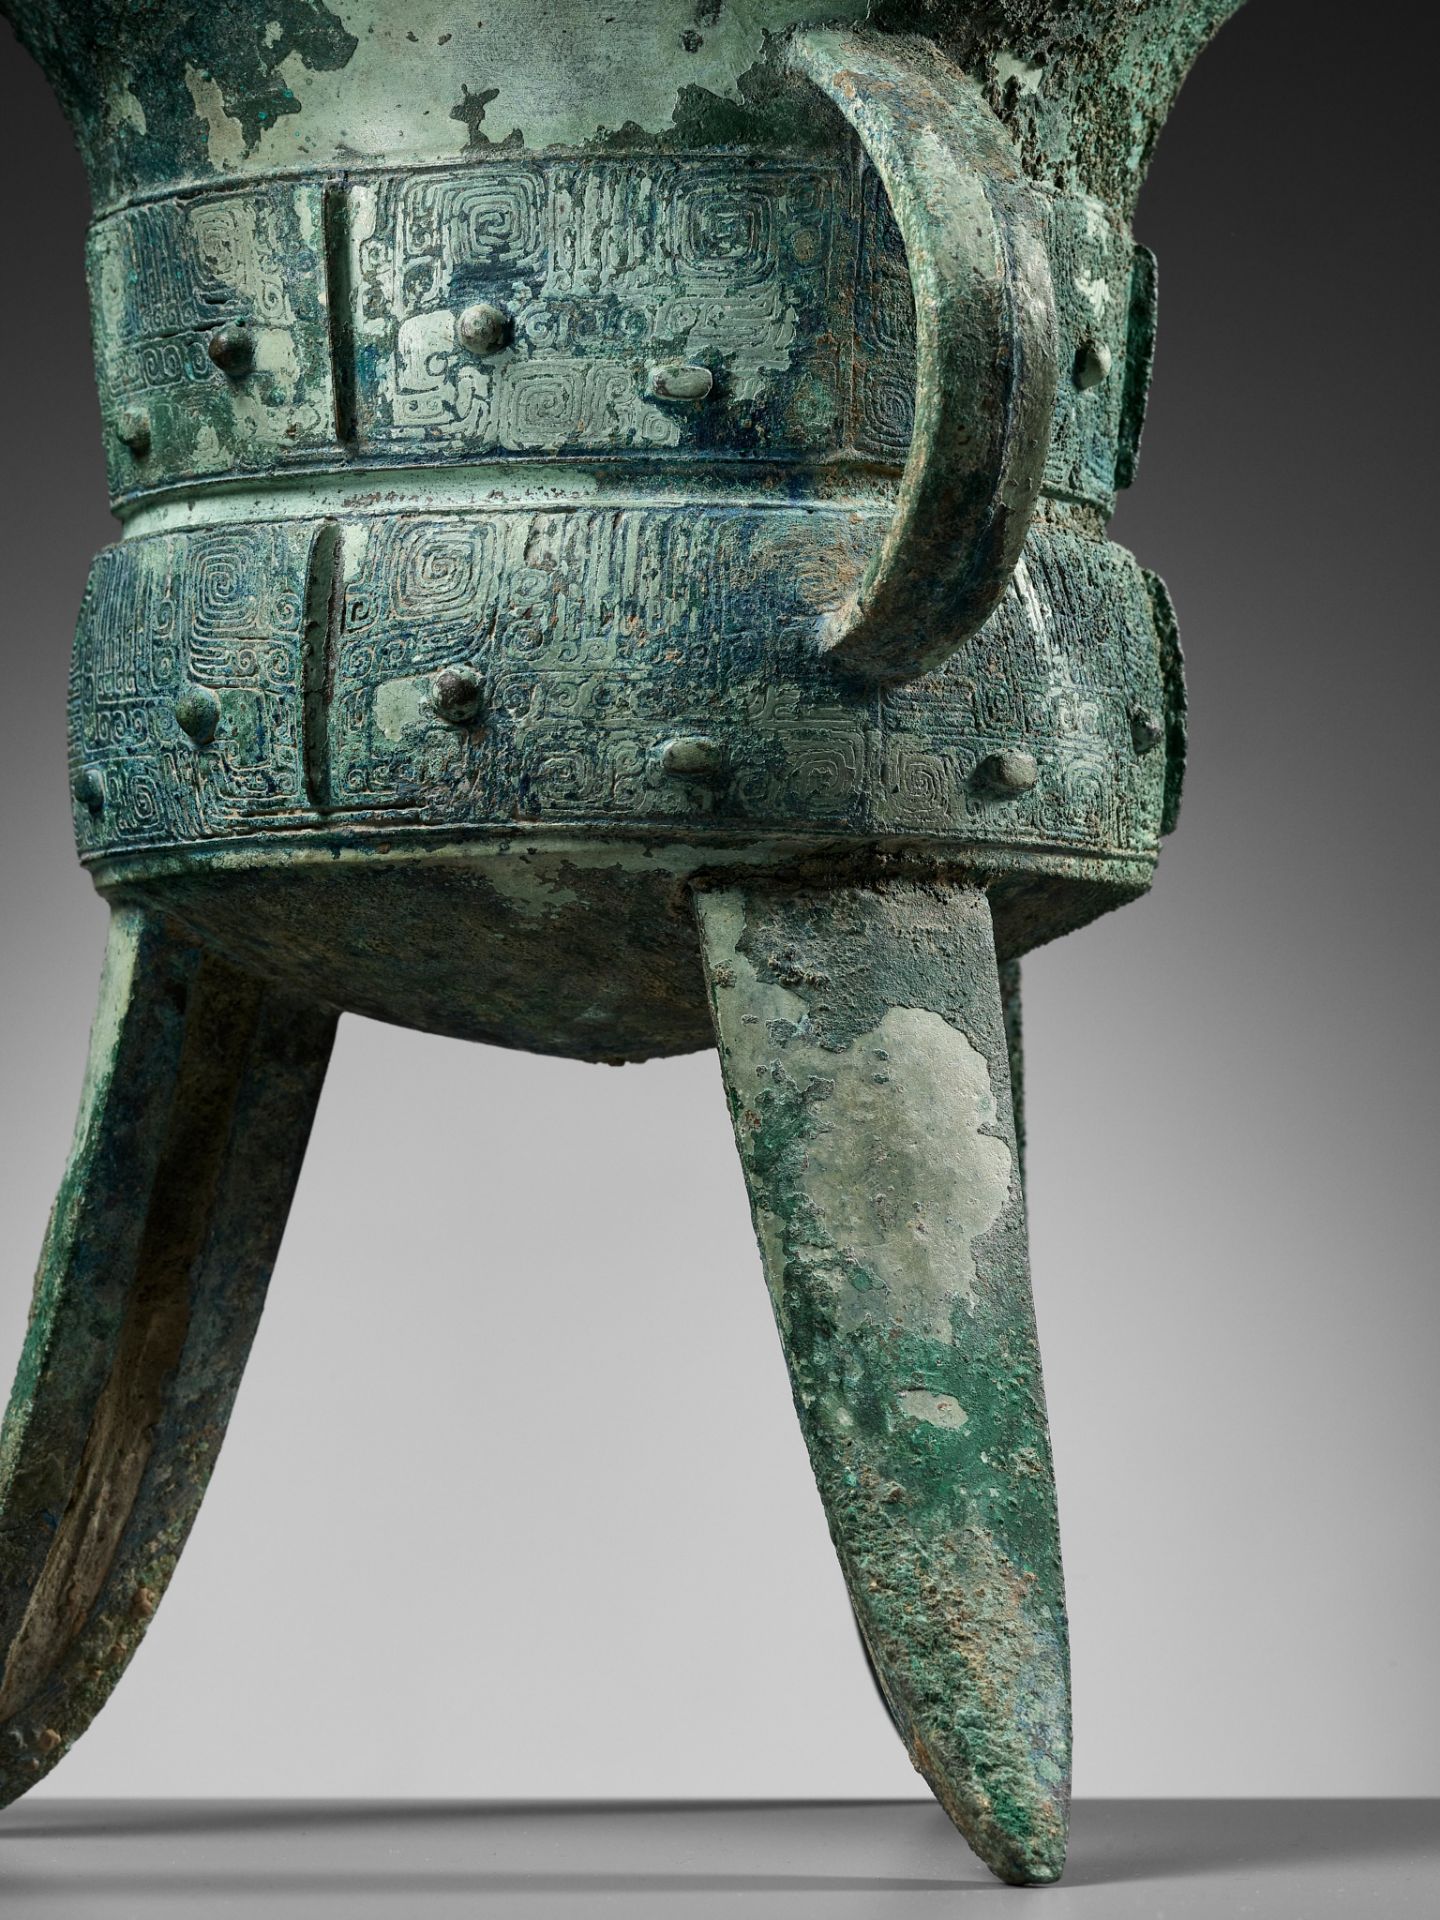 AN EXCEPTIONALLY LARGE AND MASSIVE BRONZE RITUAL TRIPOD WINE VESSEL, JIA, WITH A CLAN MARK, SHANG - Image 24 of 29